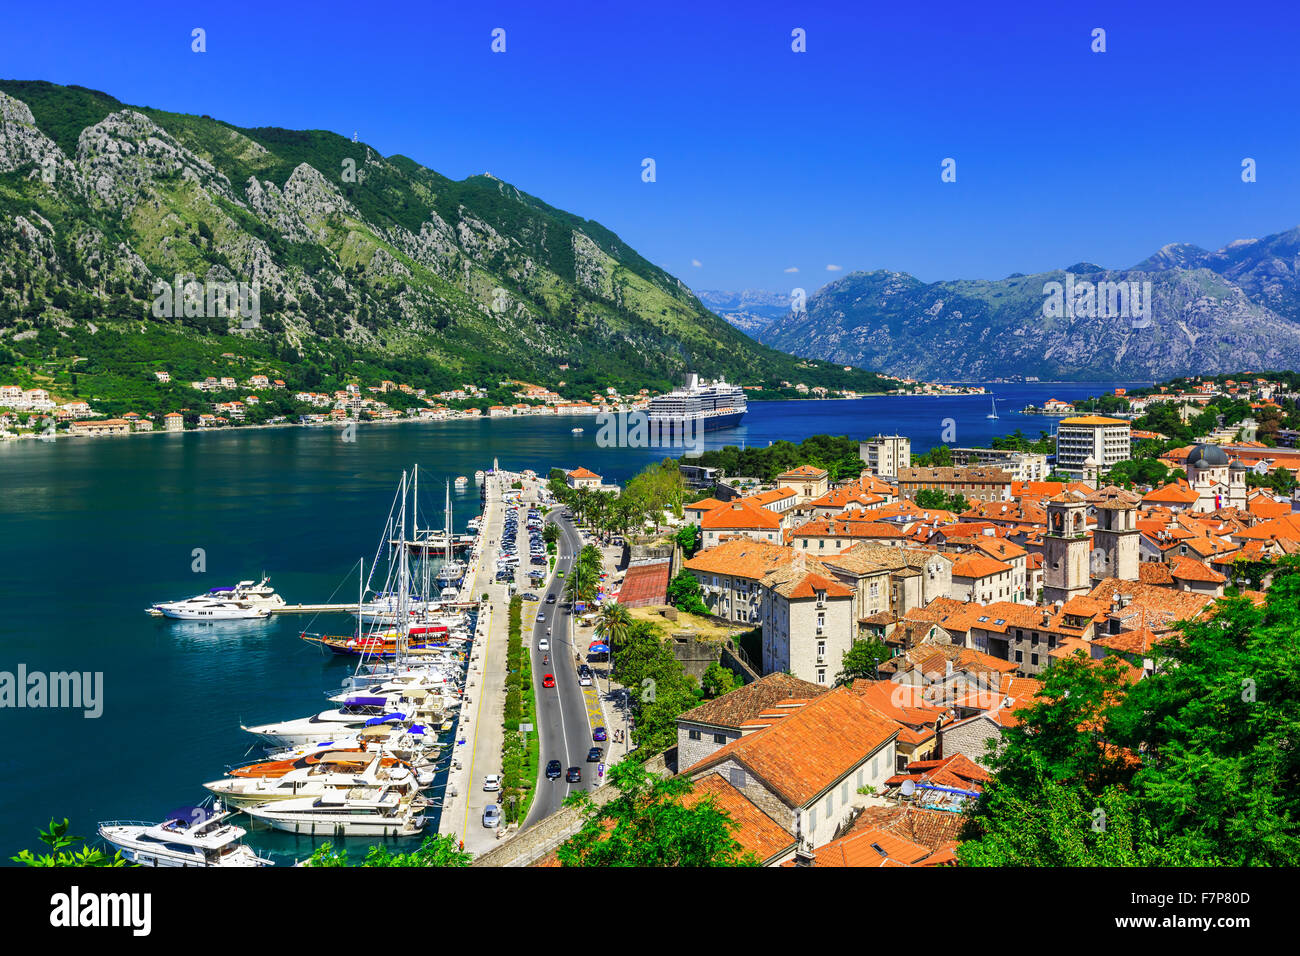 Kotor bay and Old Town from Lovcen Mountain. Montenegro Stock Photo